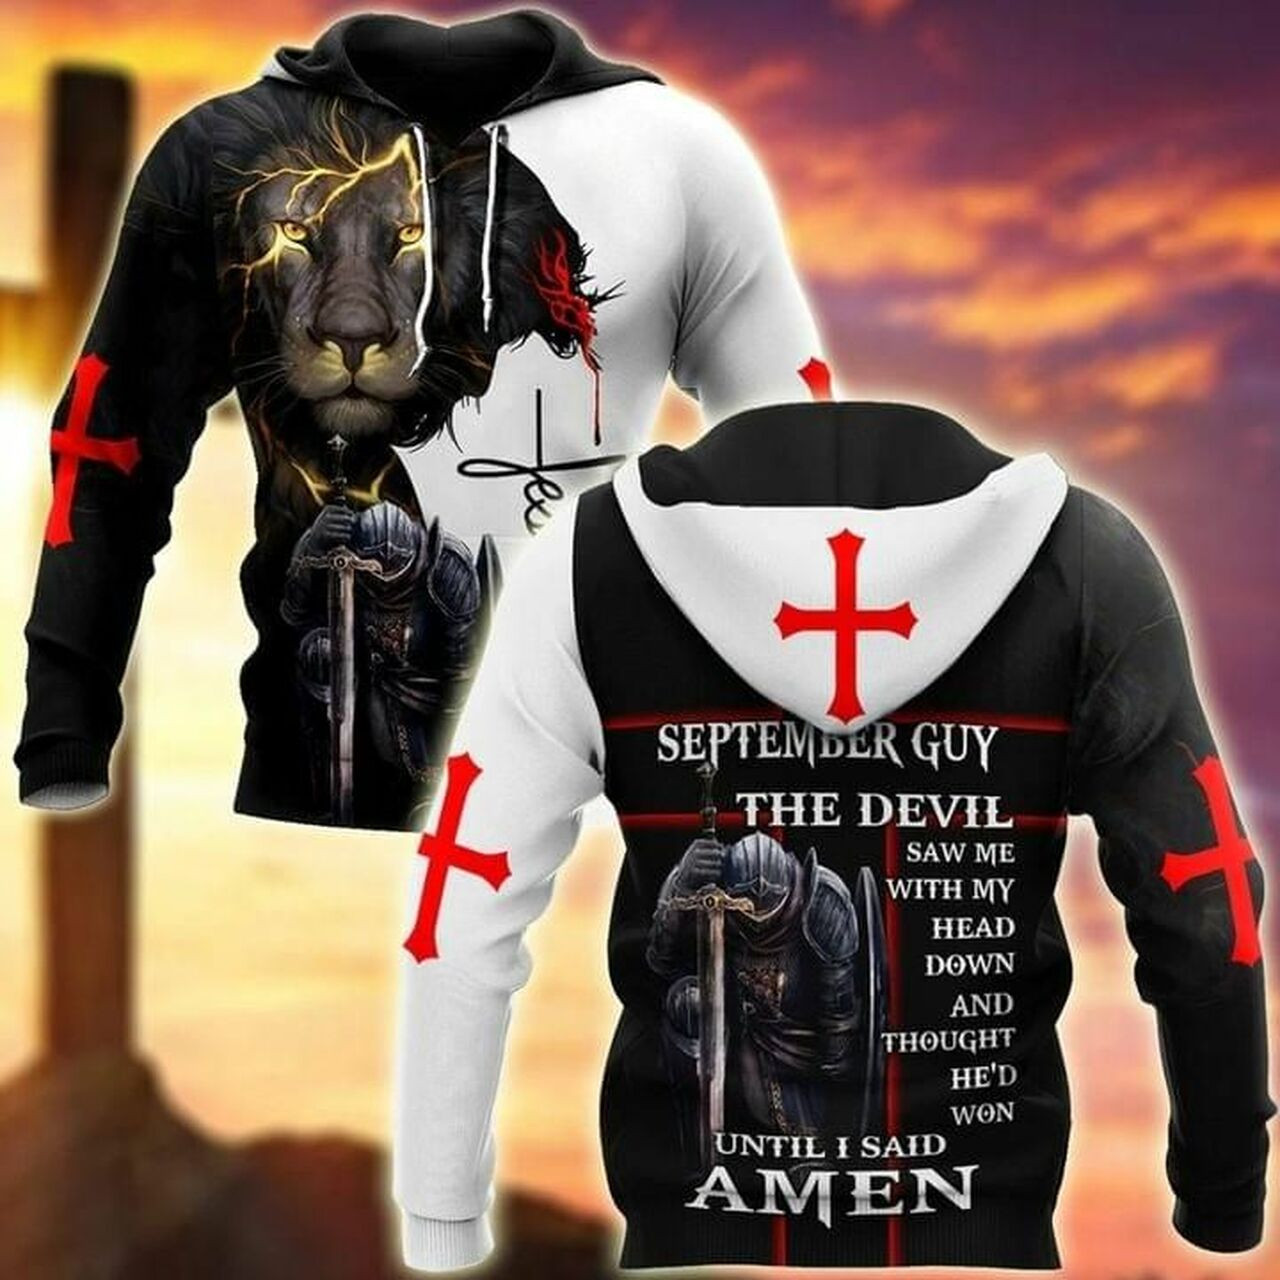 September Guy The Devil Saw Me With My Head Down And Thought Hed Won Until I Said Amen 3d Hoodie T Shirt Sweater